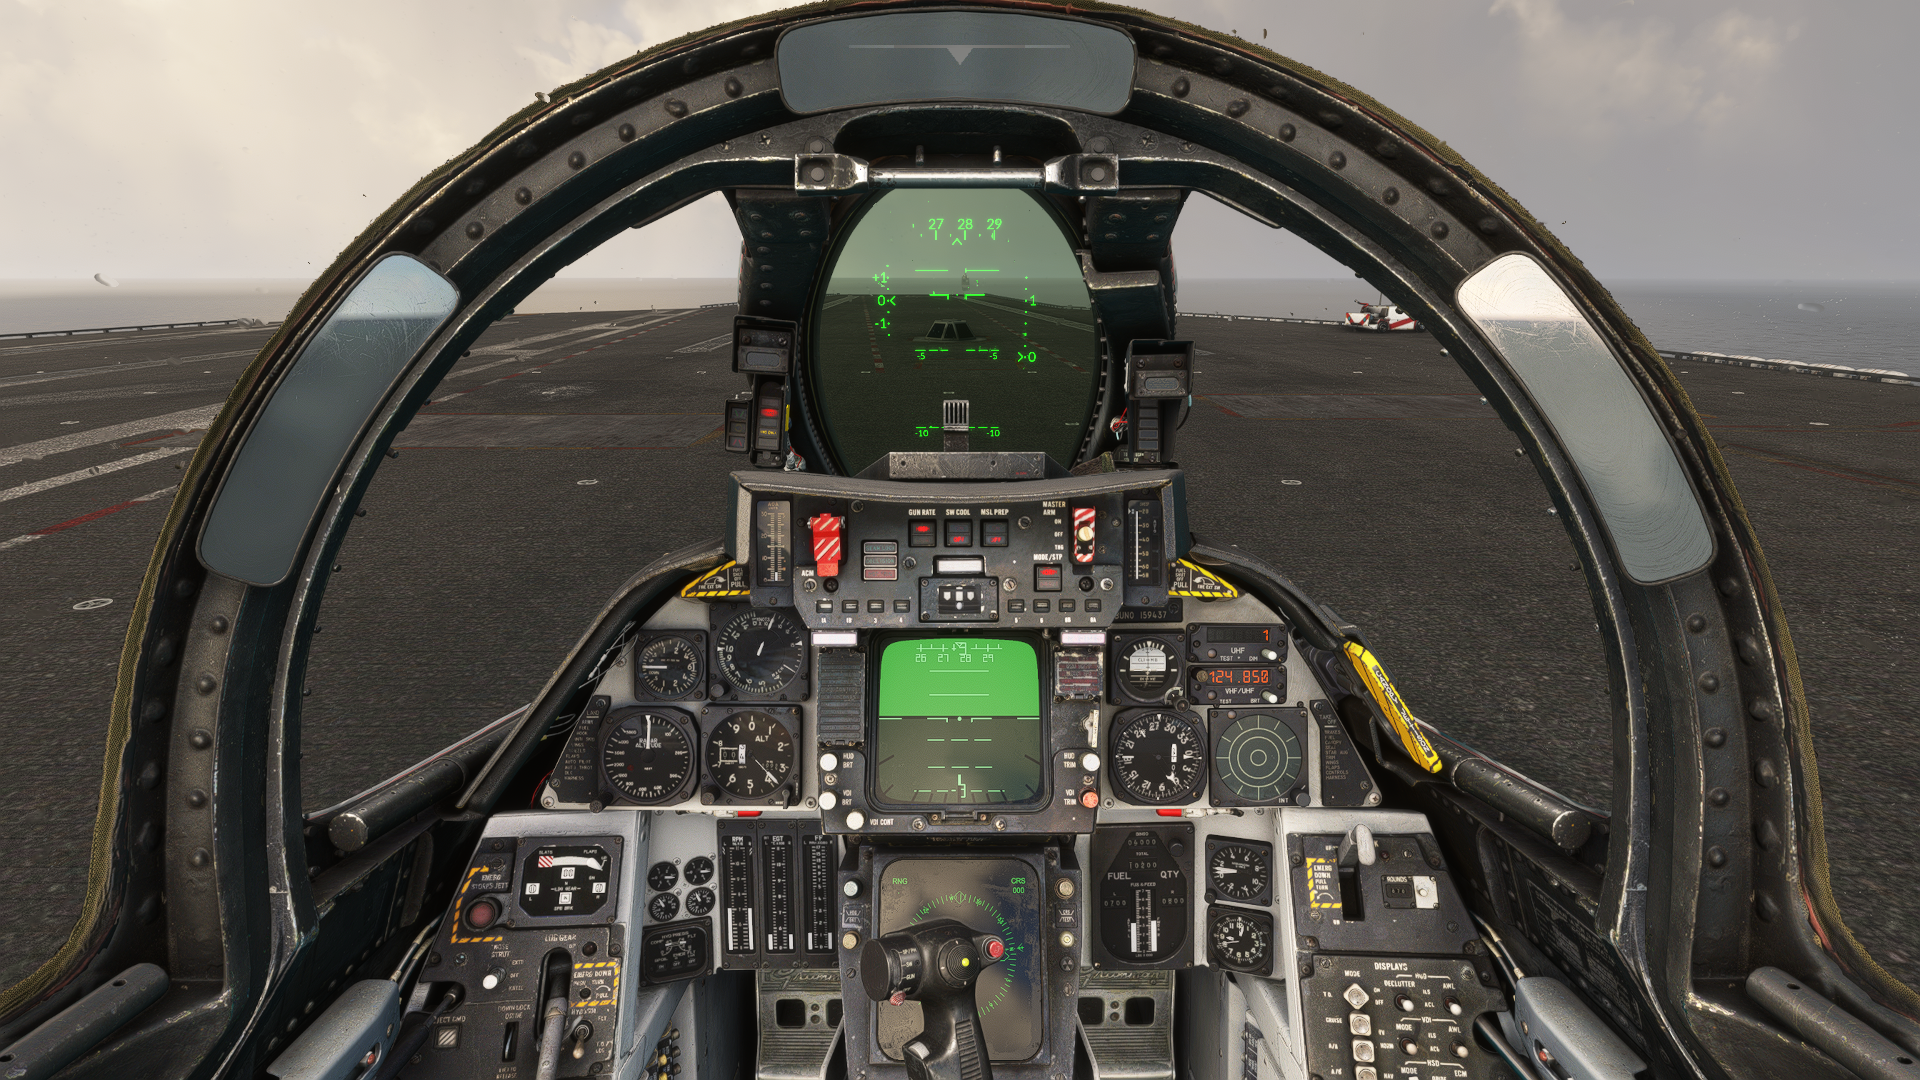 REVIEW: Heatblur/IndiaFoxtEcho F-14 - Not What I Expected - Reviews